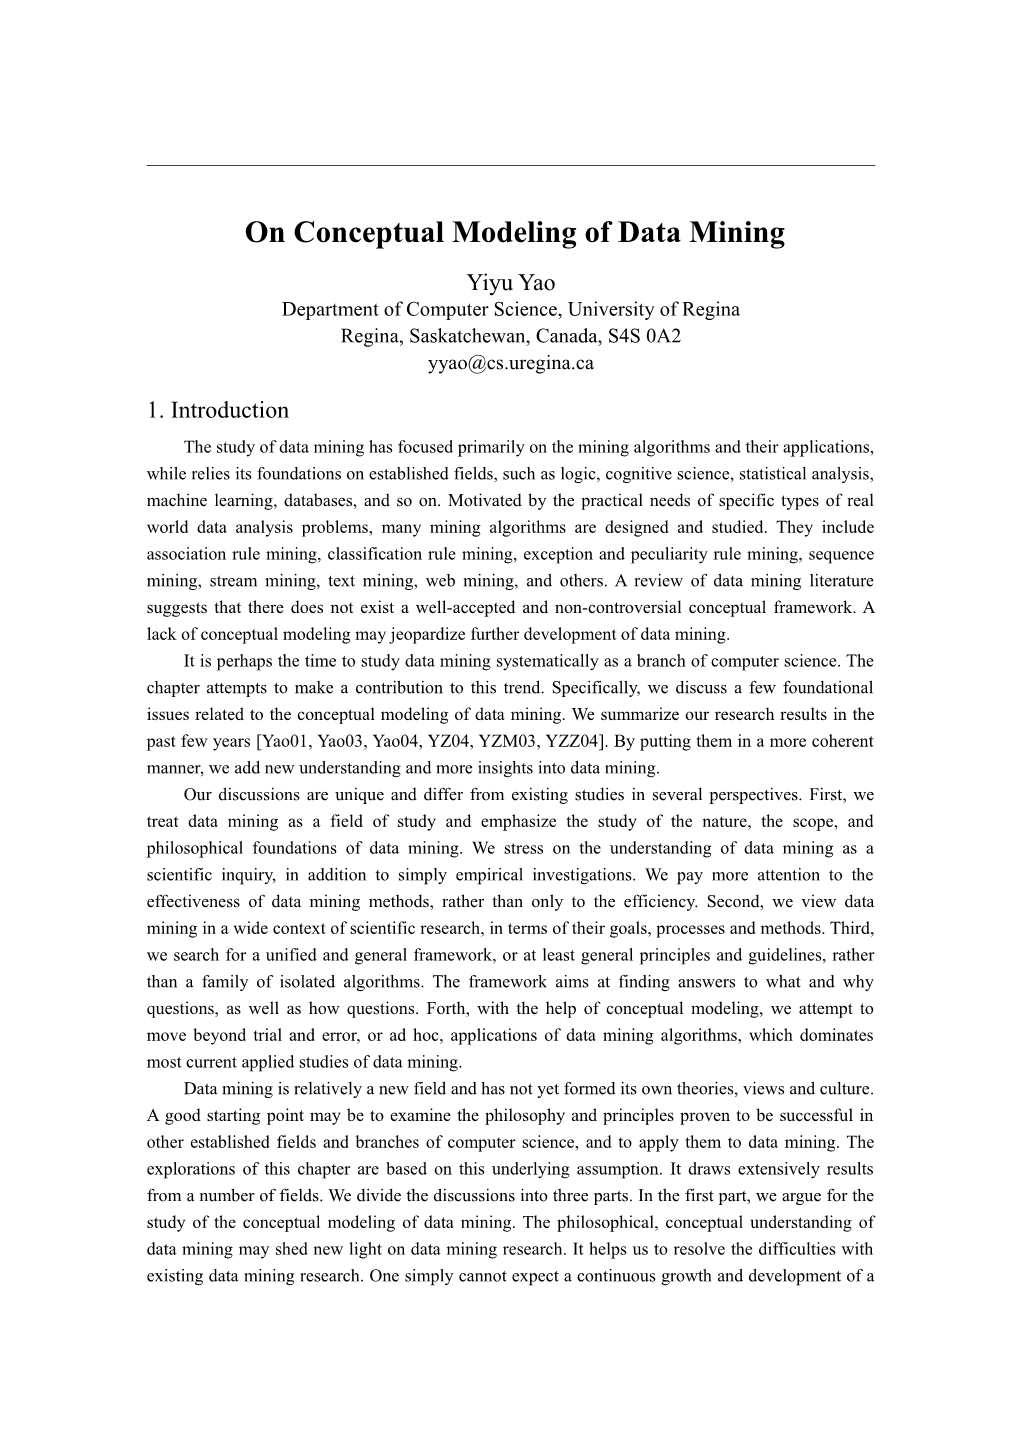 Concepual Modeling of Data Mining